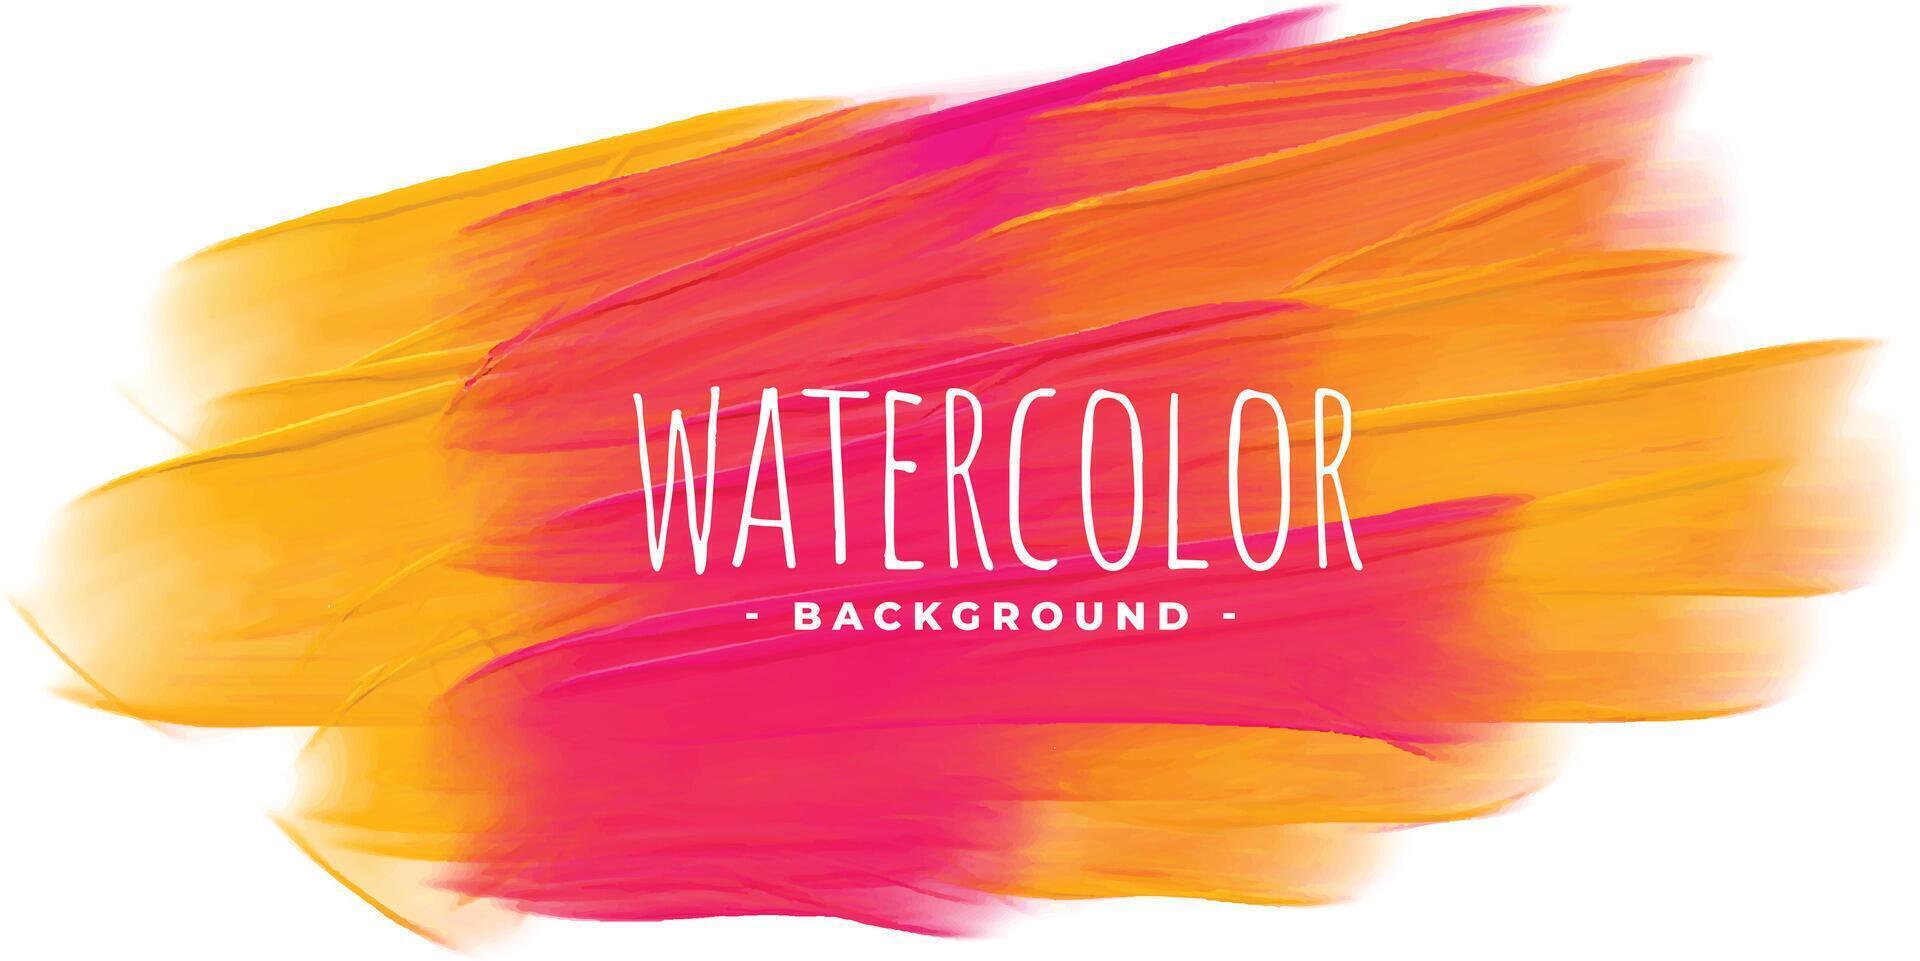 yelloq and red watercolor texture background vector